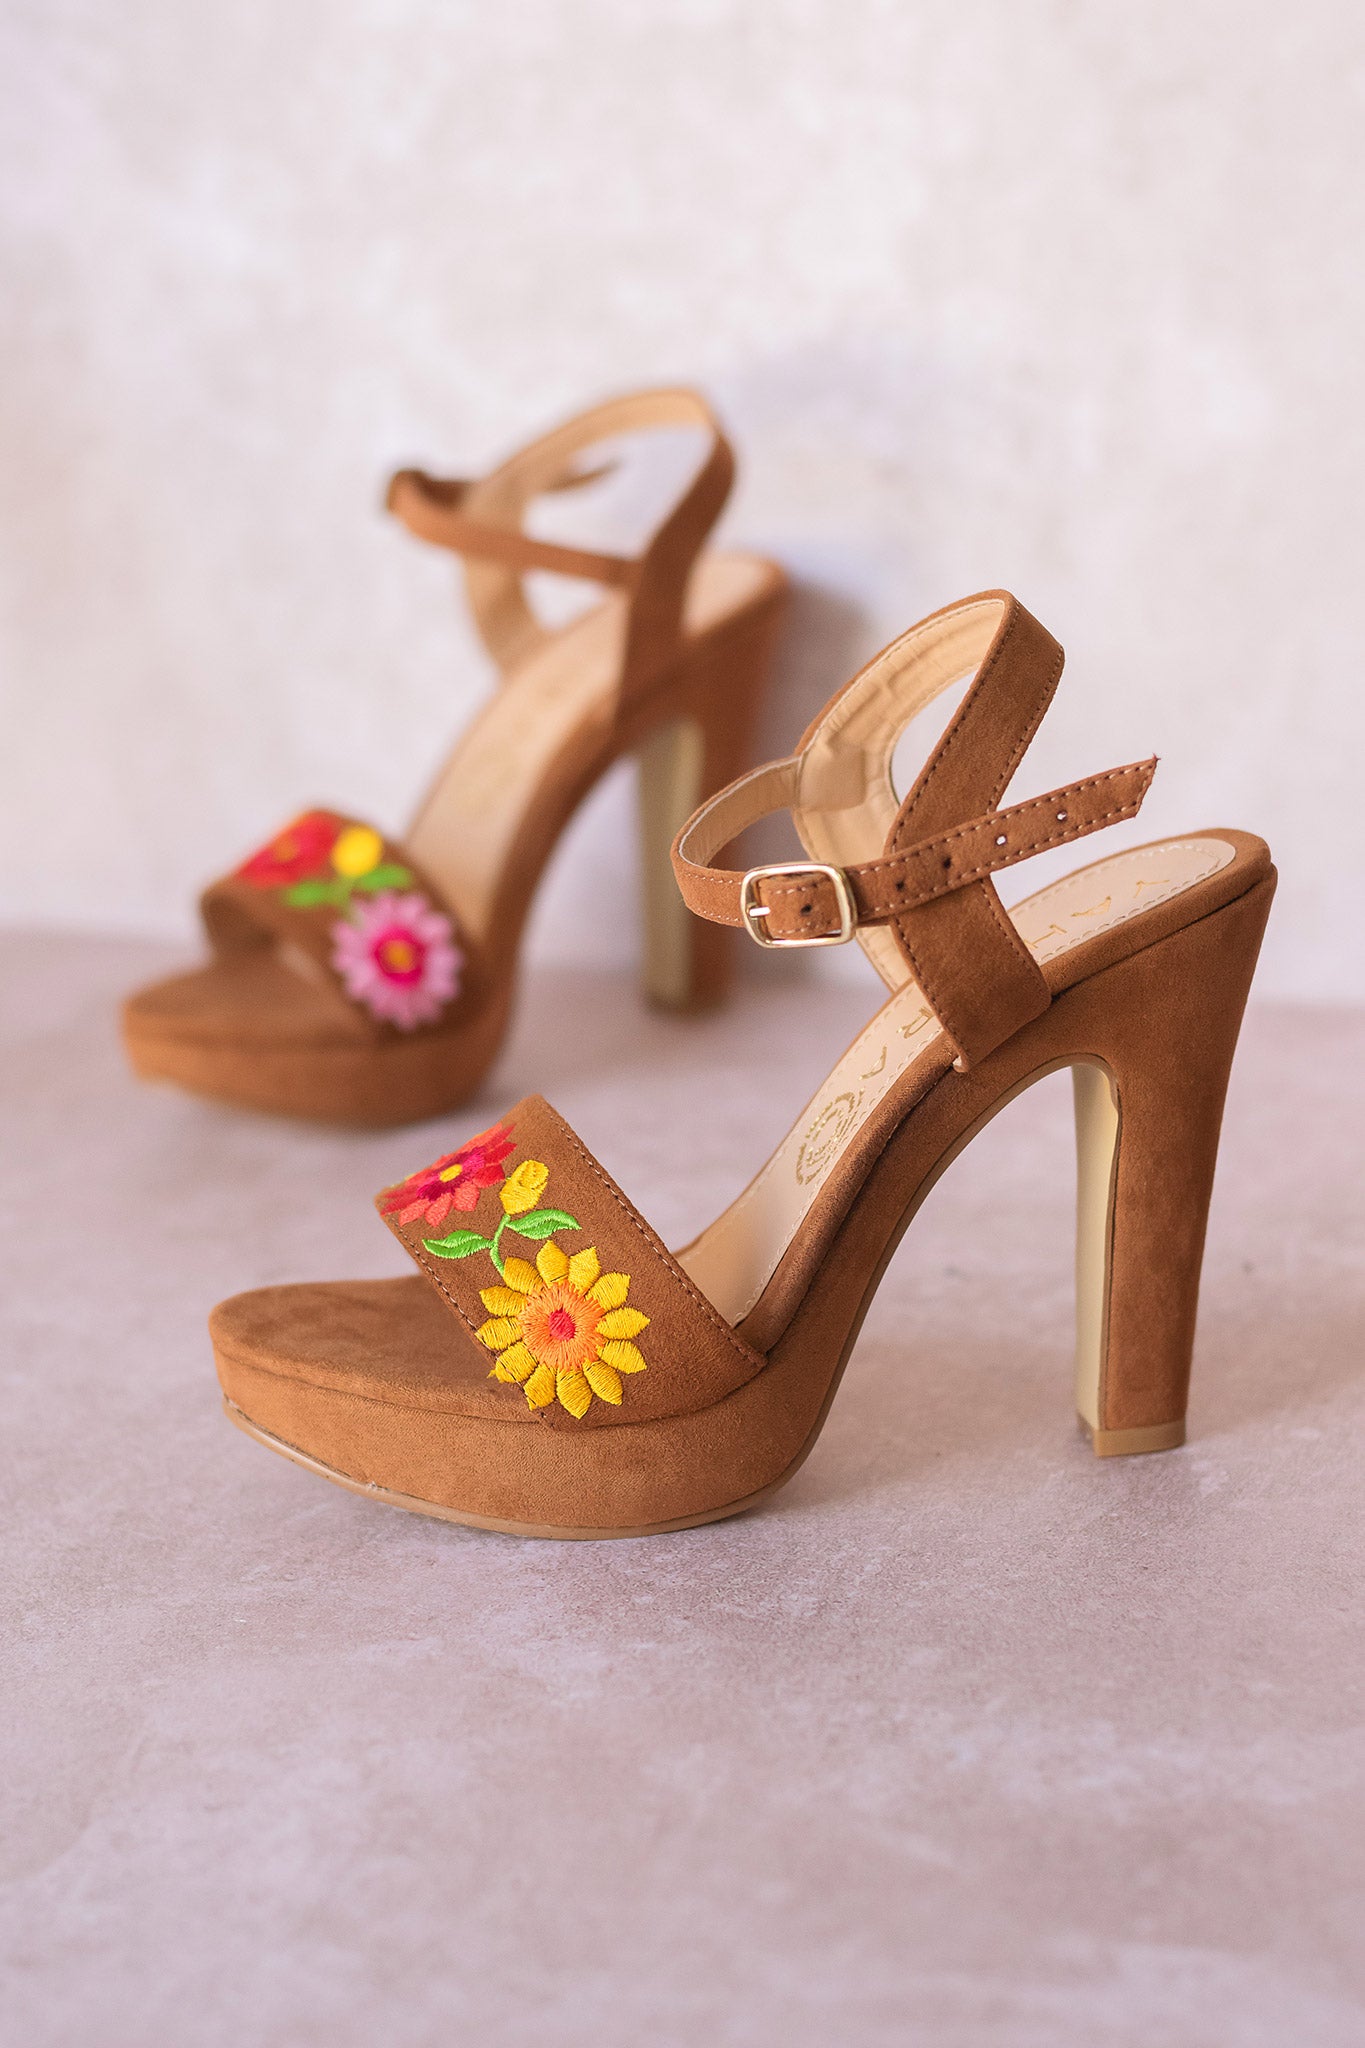 FloralBreeze - Heels with Embroidered Floral Design and Thin High Heel, 5727-Y